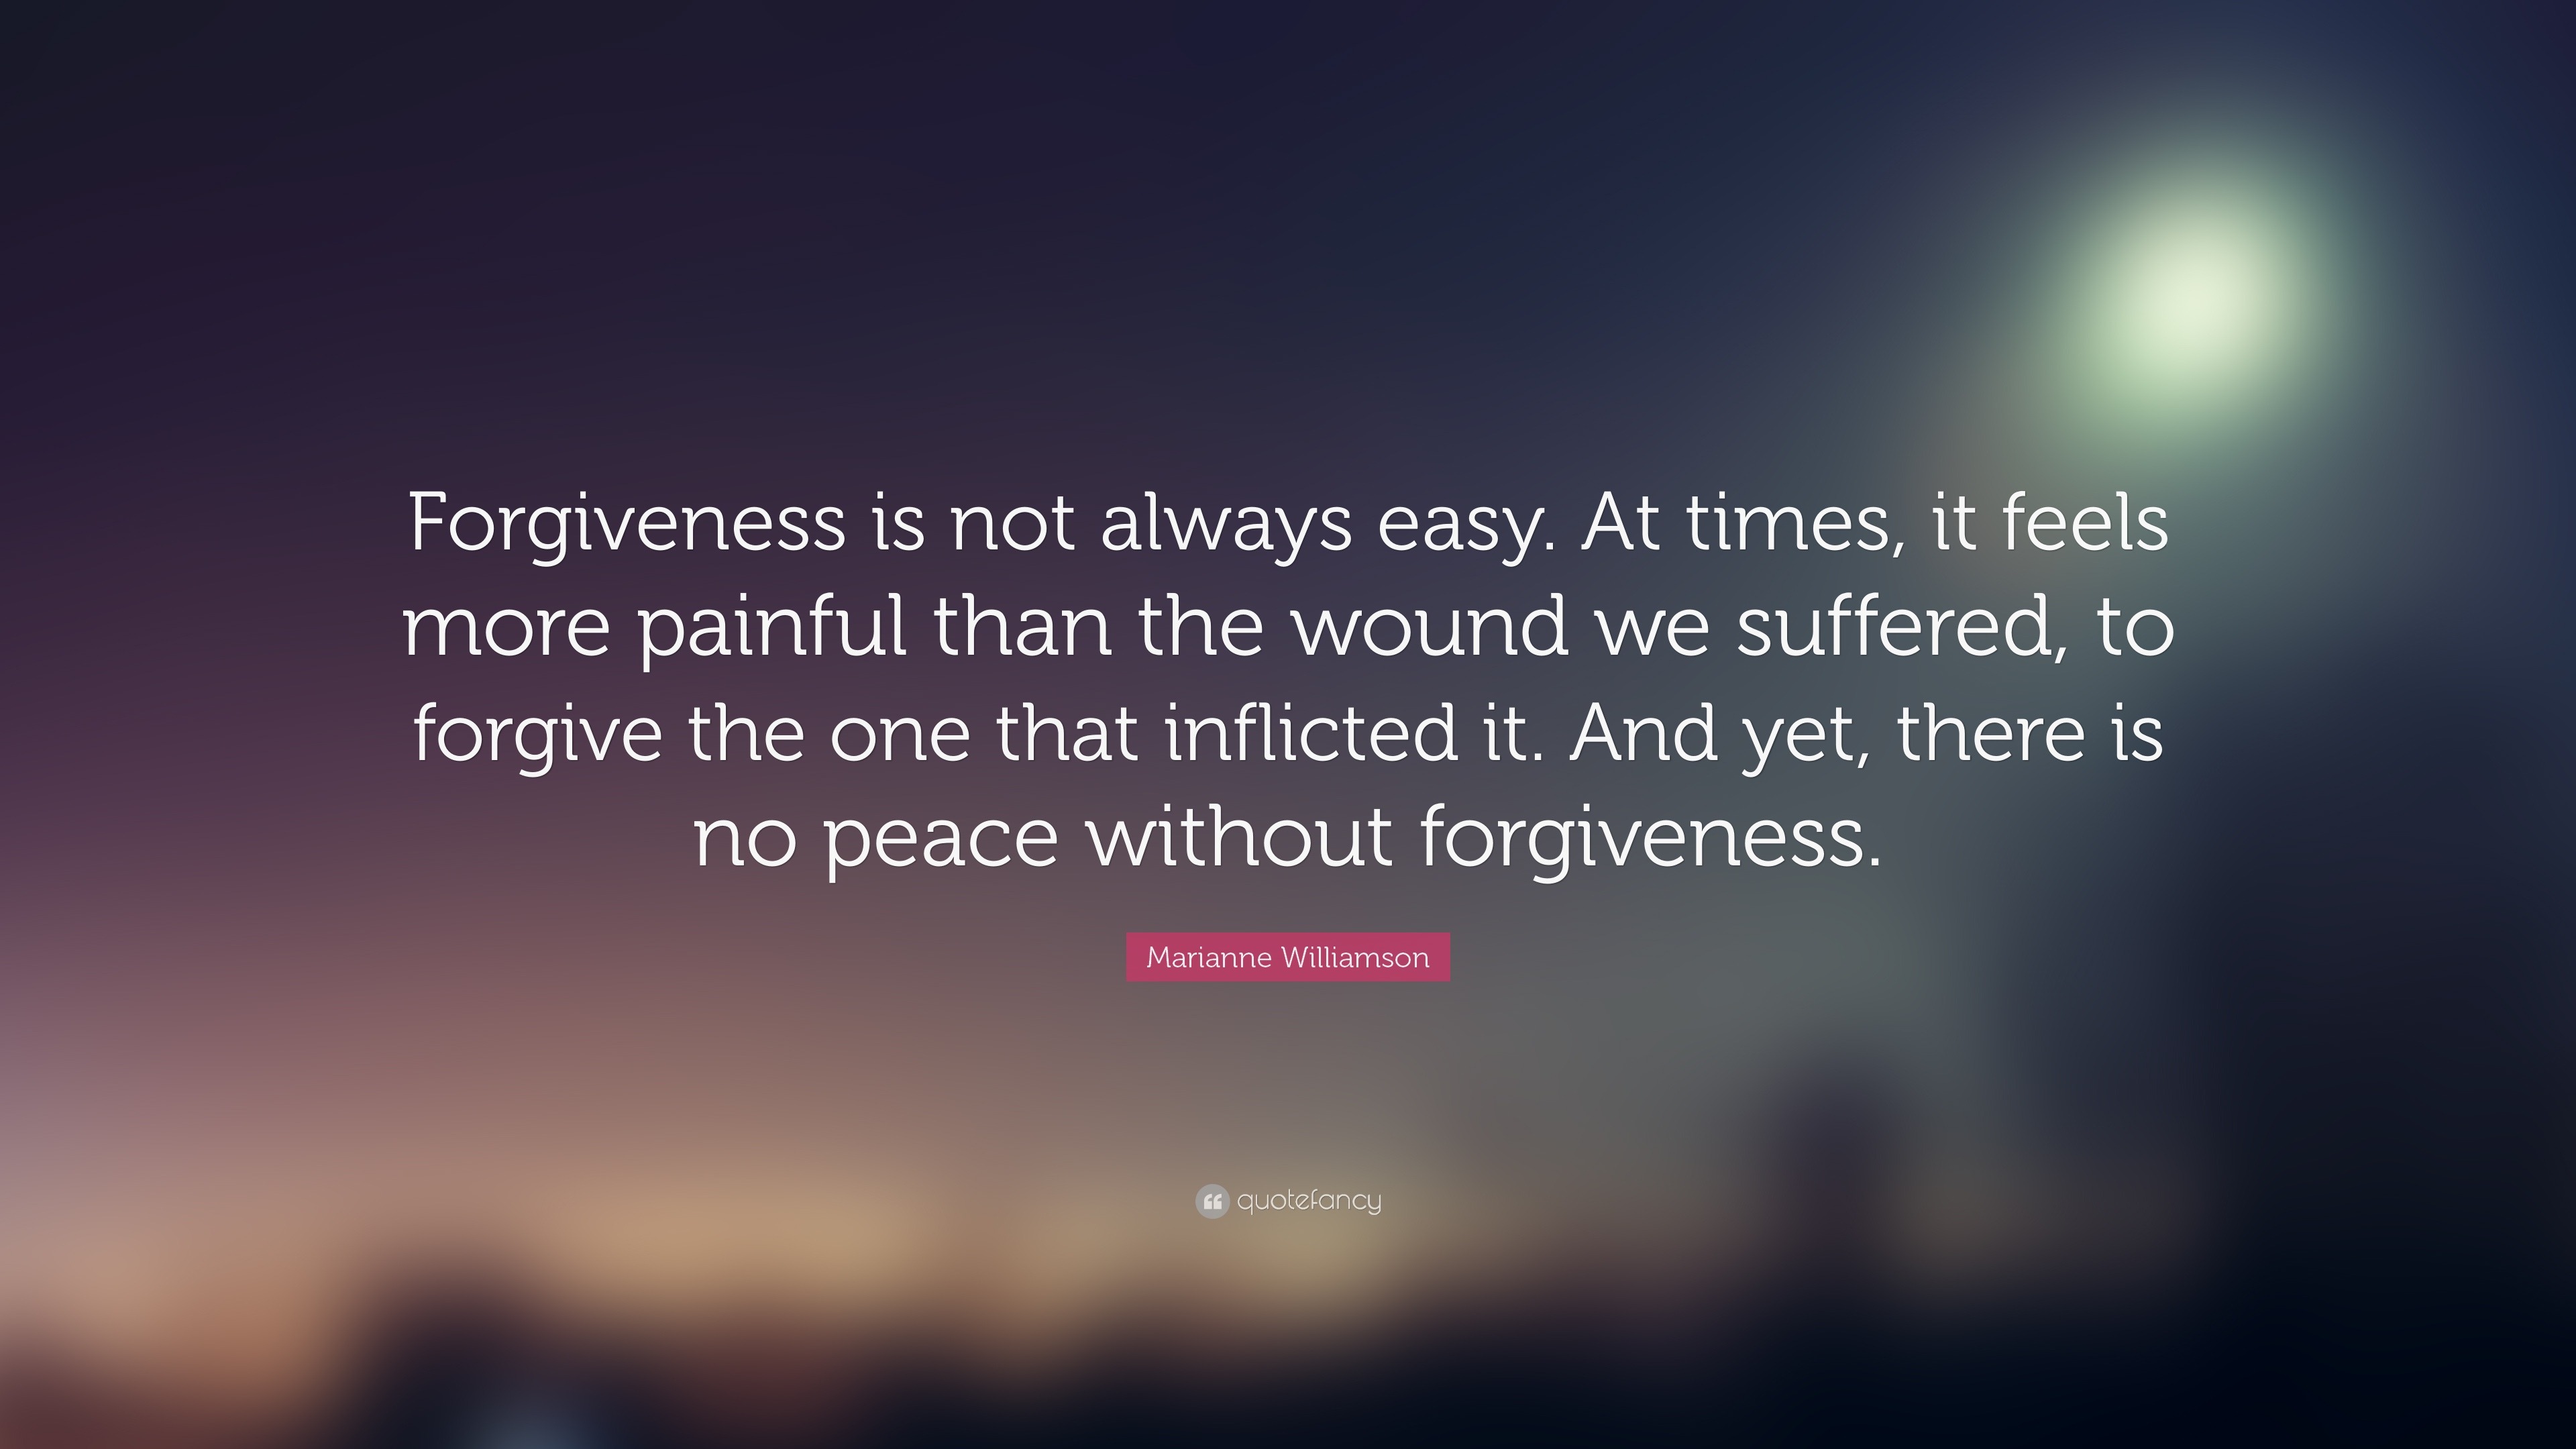 Forgiveness Quotes (40 wallpapers) - Quotefancy